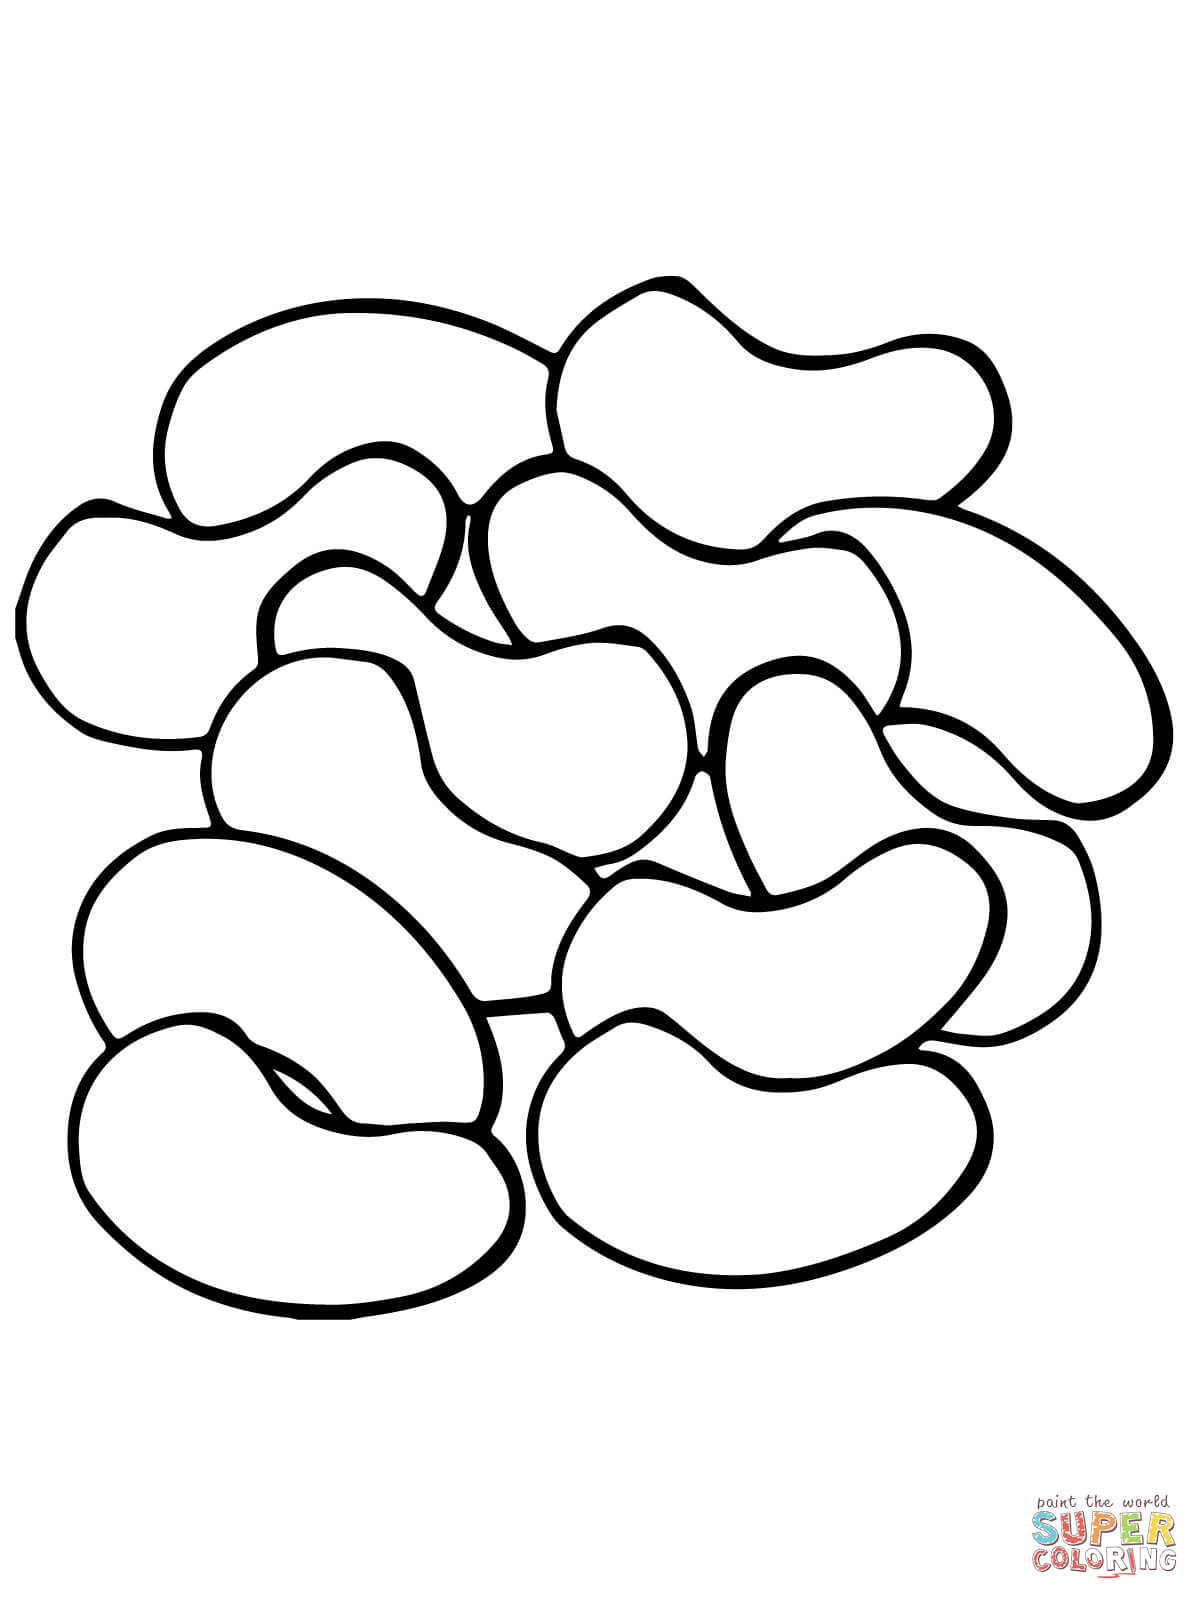 Beans clipart drawing. Kidney coloring page free